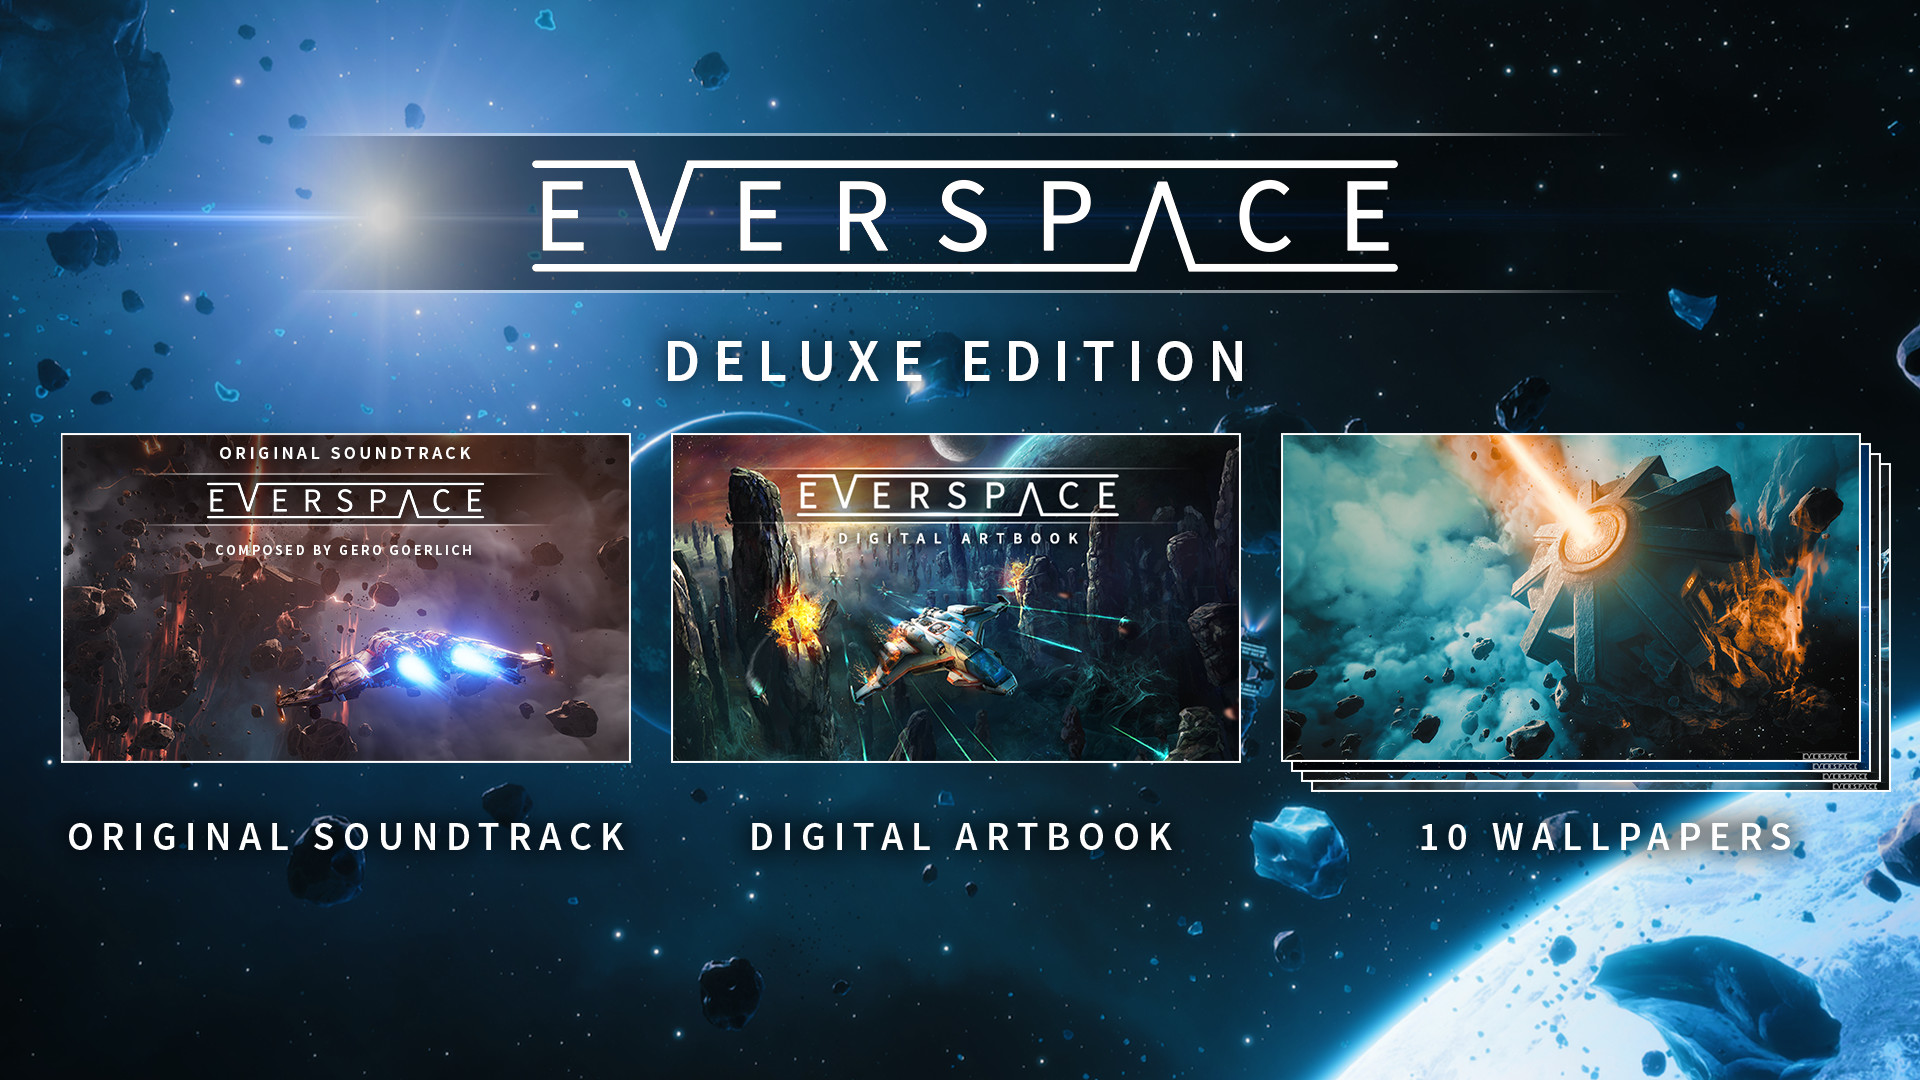 EVERSPACE™ - Upgrade to Deluxe Edition Featured Screenshot #1